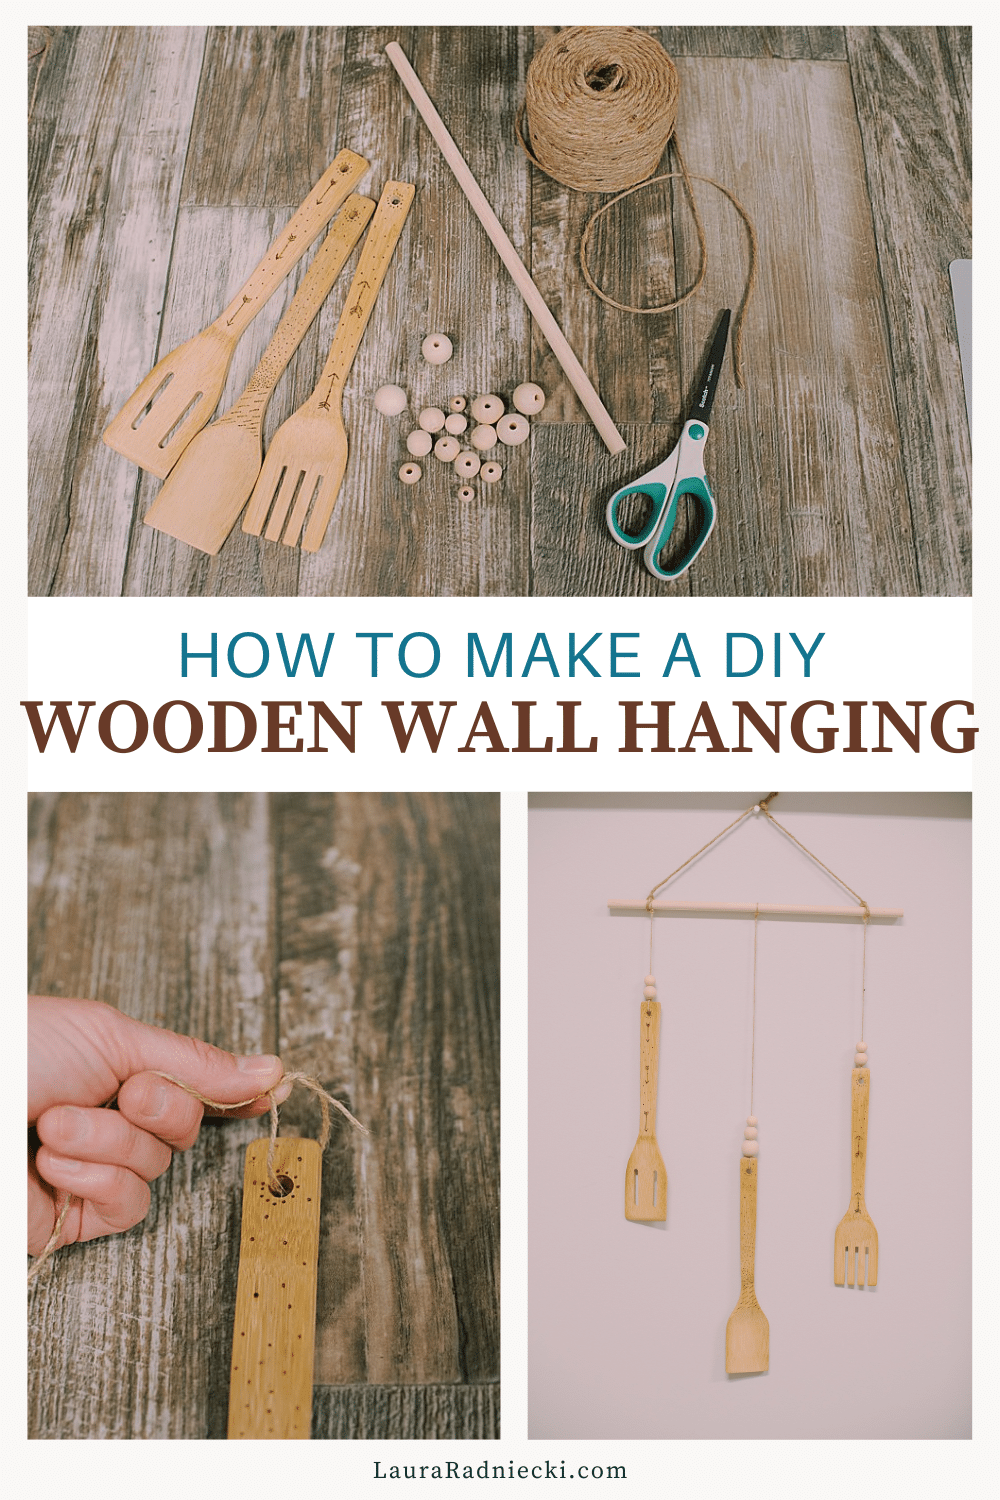 How to make a DIY woodburned wall hanging using wooden kitchen utensils